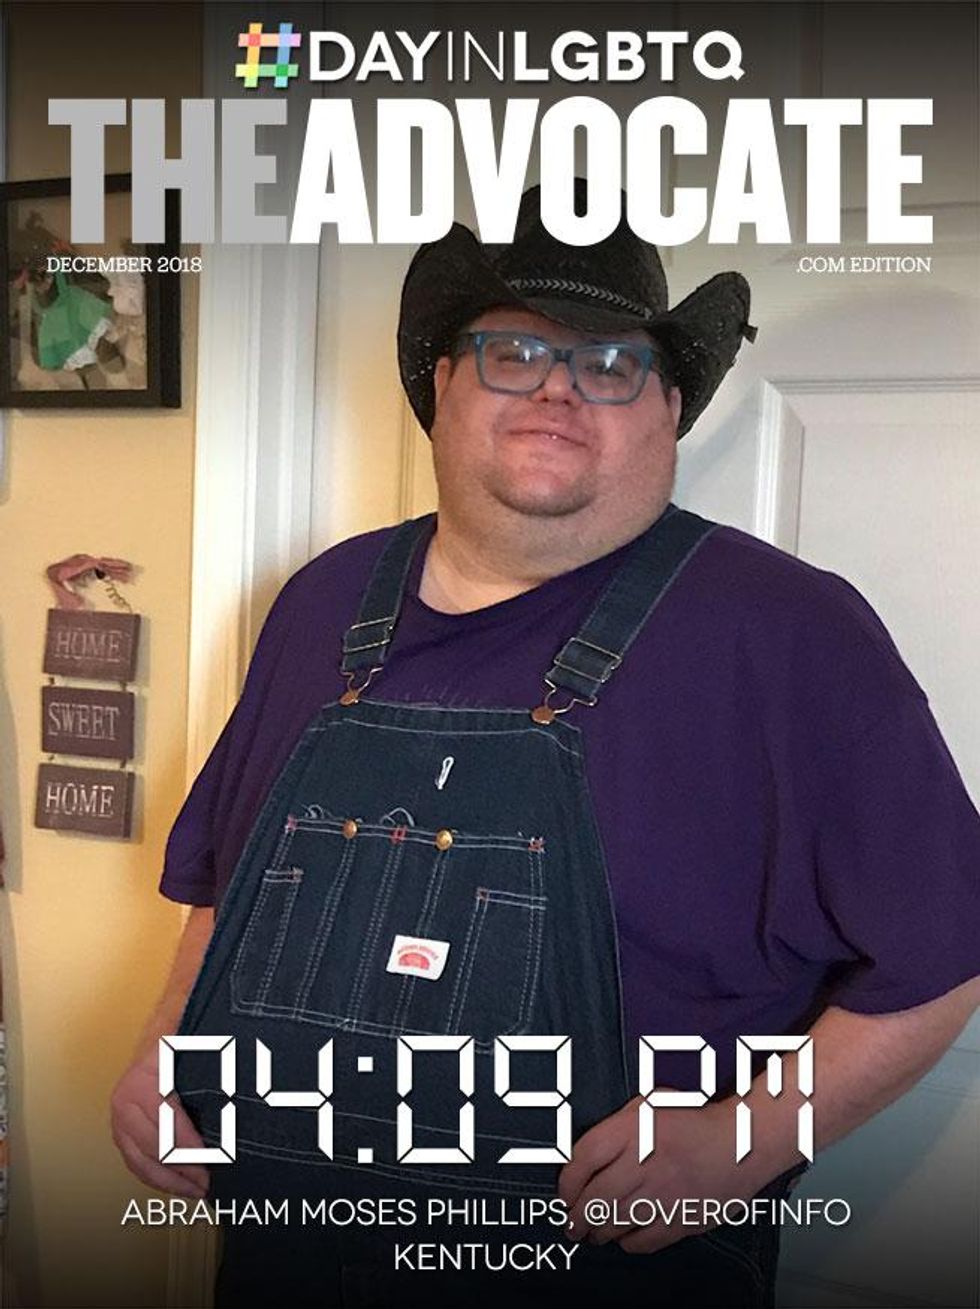 Pm-04-09-phillips-theadvocate-2018-dayinlgbt-cover-template-655